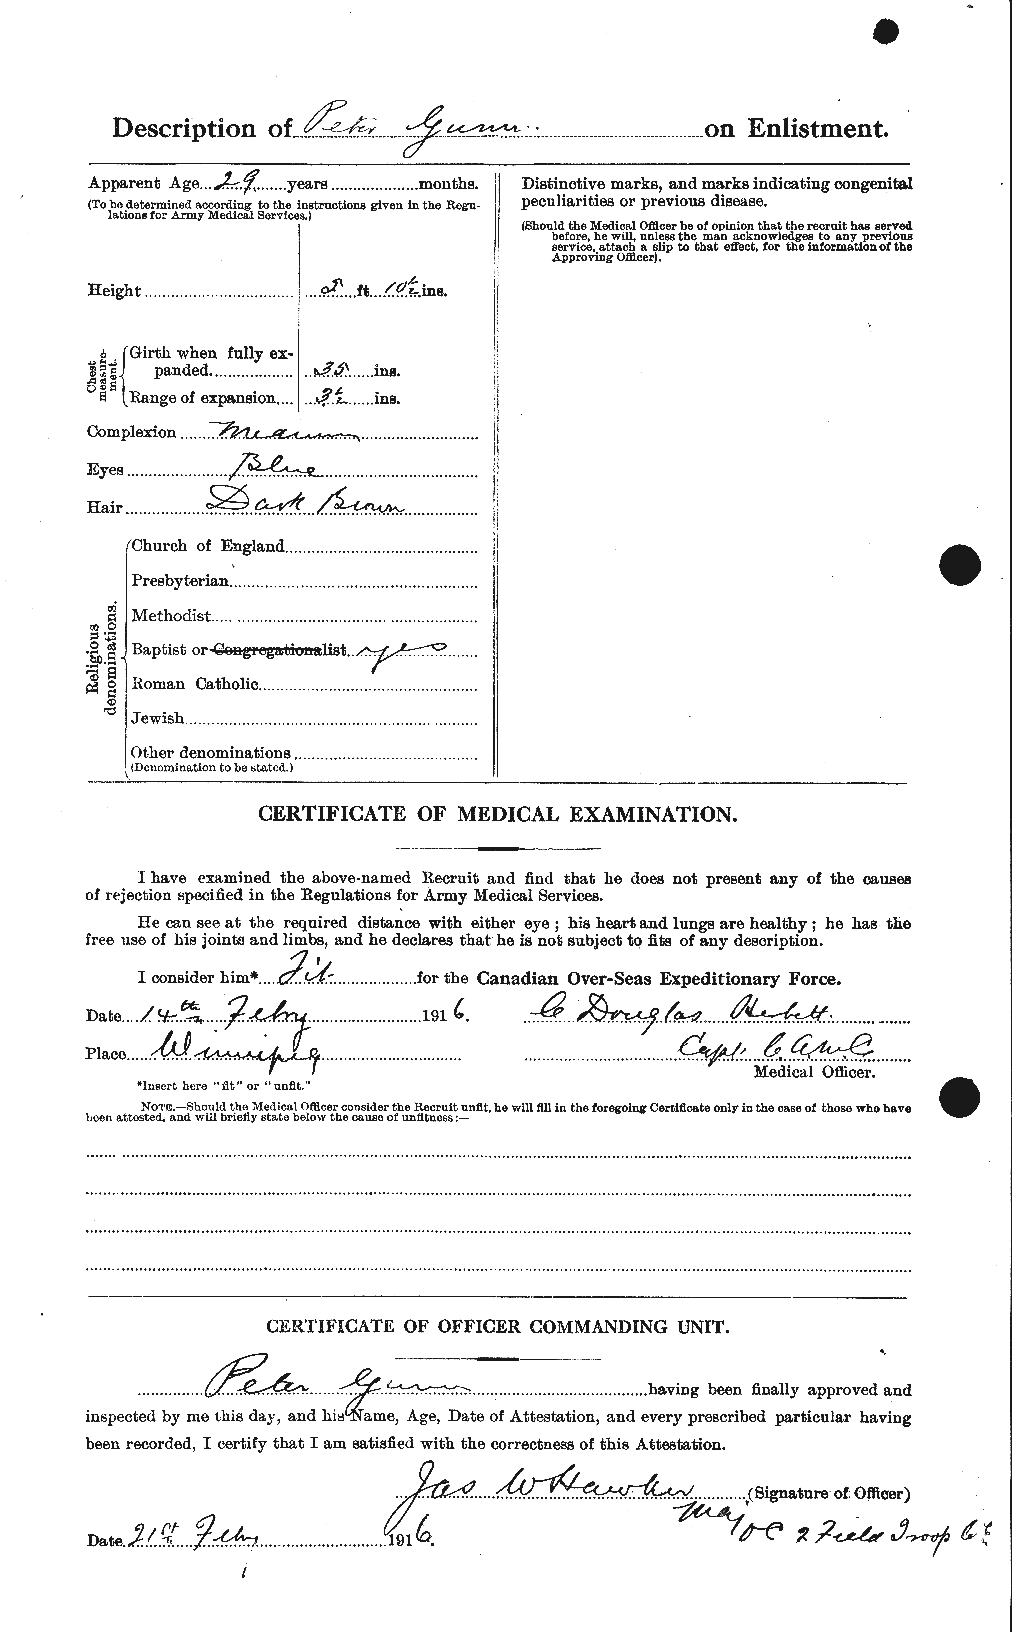 Personnel Records of the First World War - CEF 369318b